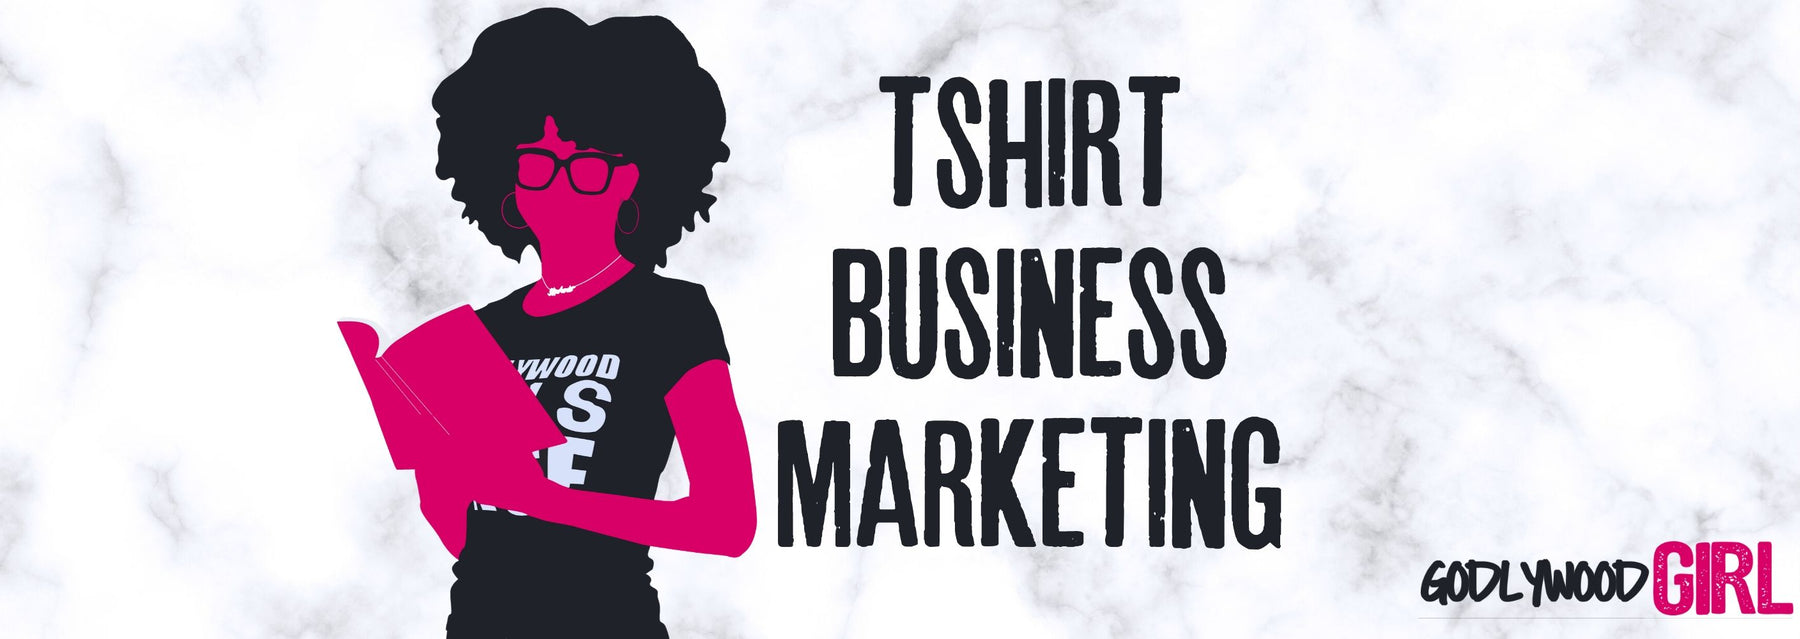 T SHIRT MARKETING STRATEGIES (POWERFUL Instagram Marketing Tips For Clothing Brands)